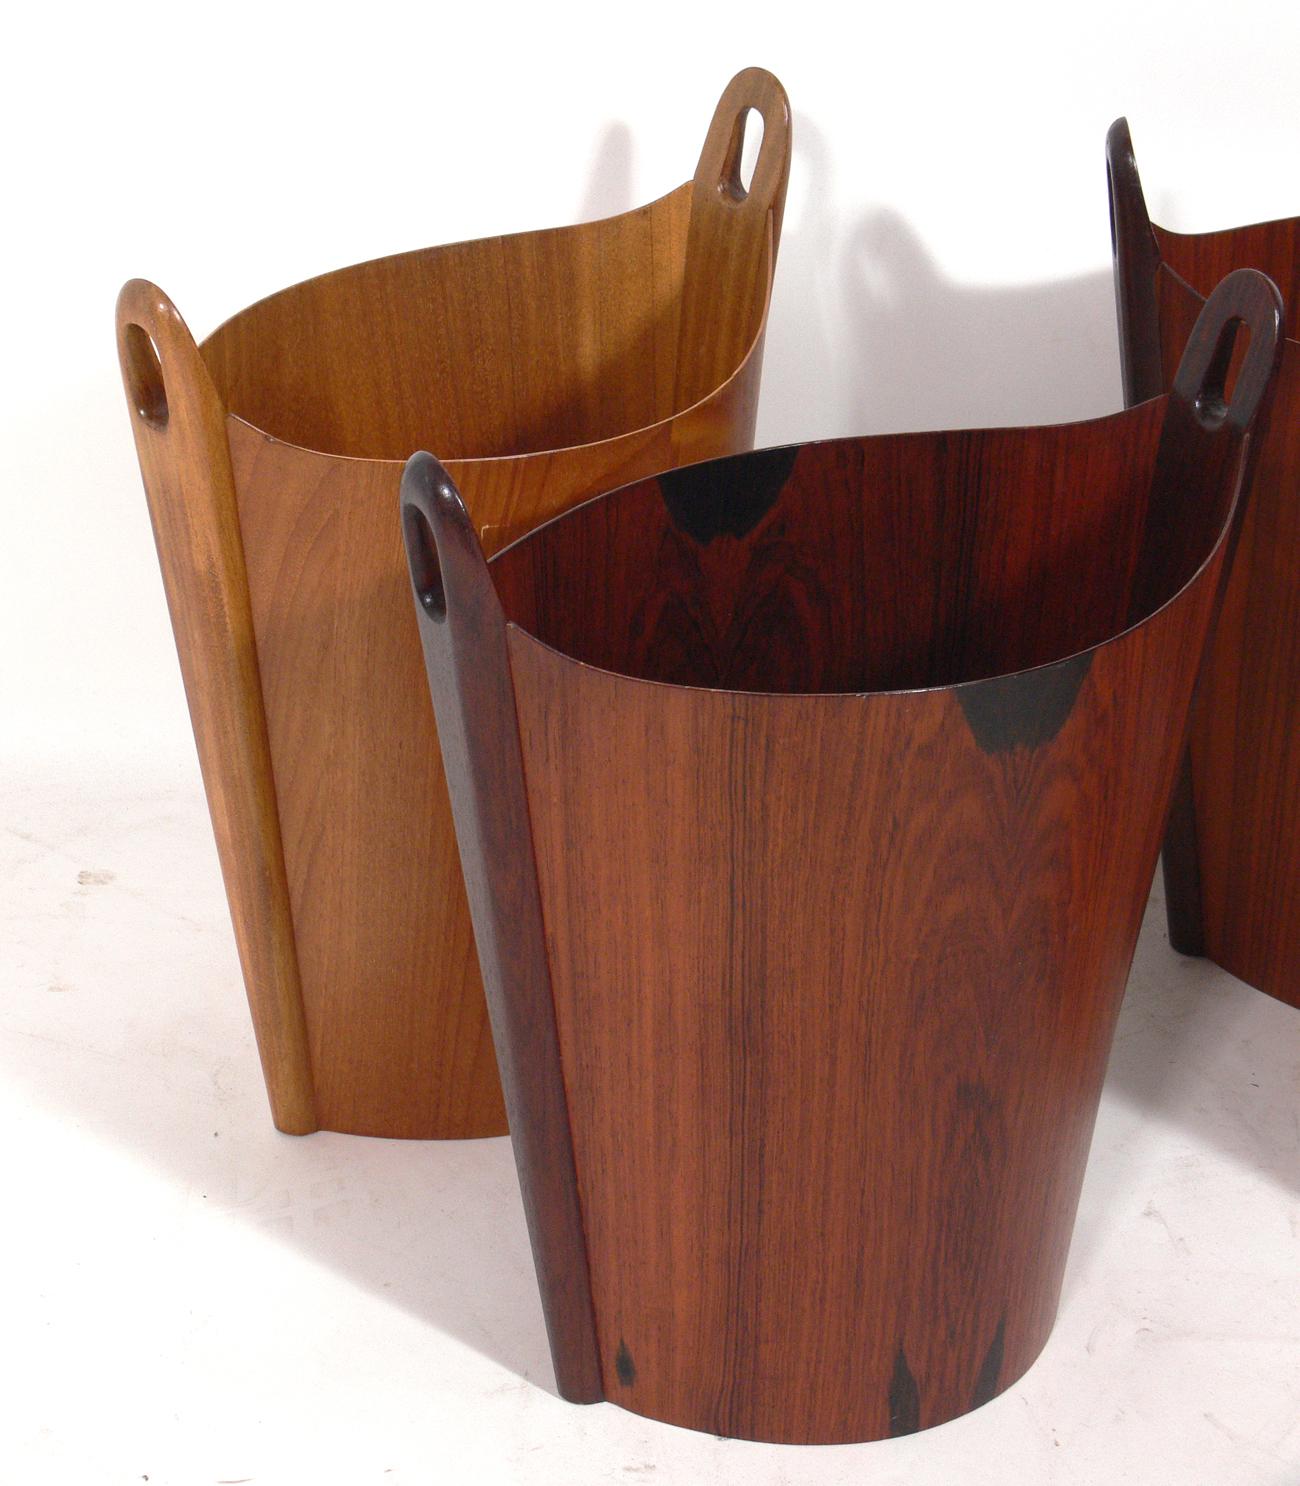 Selection of Danish modern waste cans, designed by Einar Barnes for P.S. Heggen, Norway, circa 1960s. Some examples are constructed of rosewood and the others are teak or beech. Most are signed with branded manufacturer's mark to the interiors [P.S.